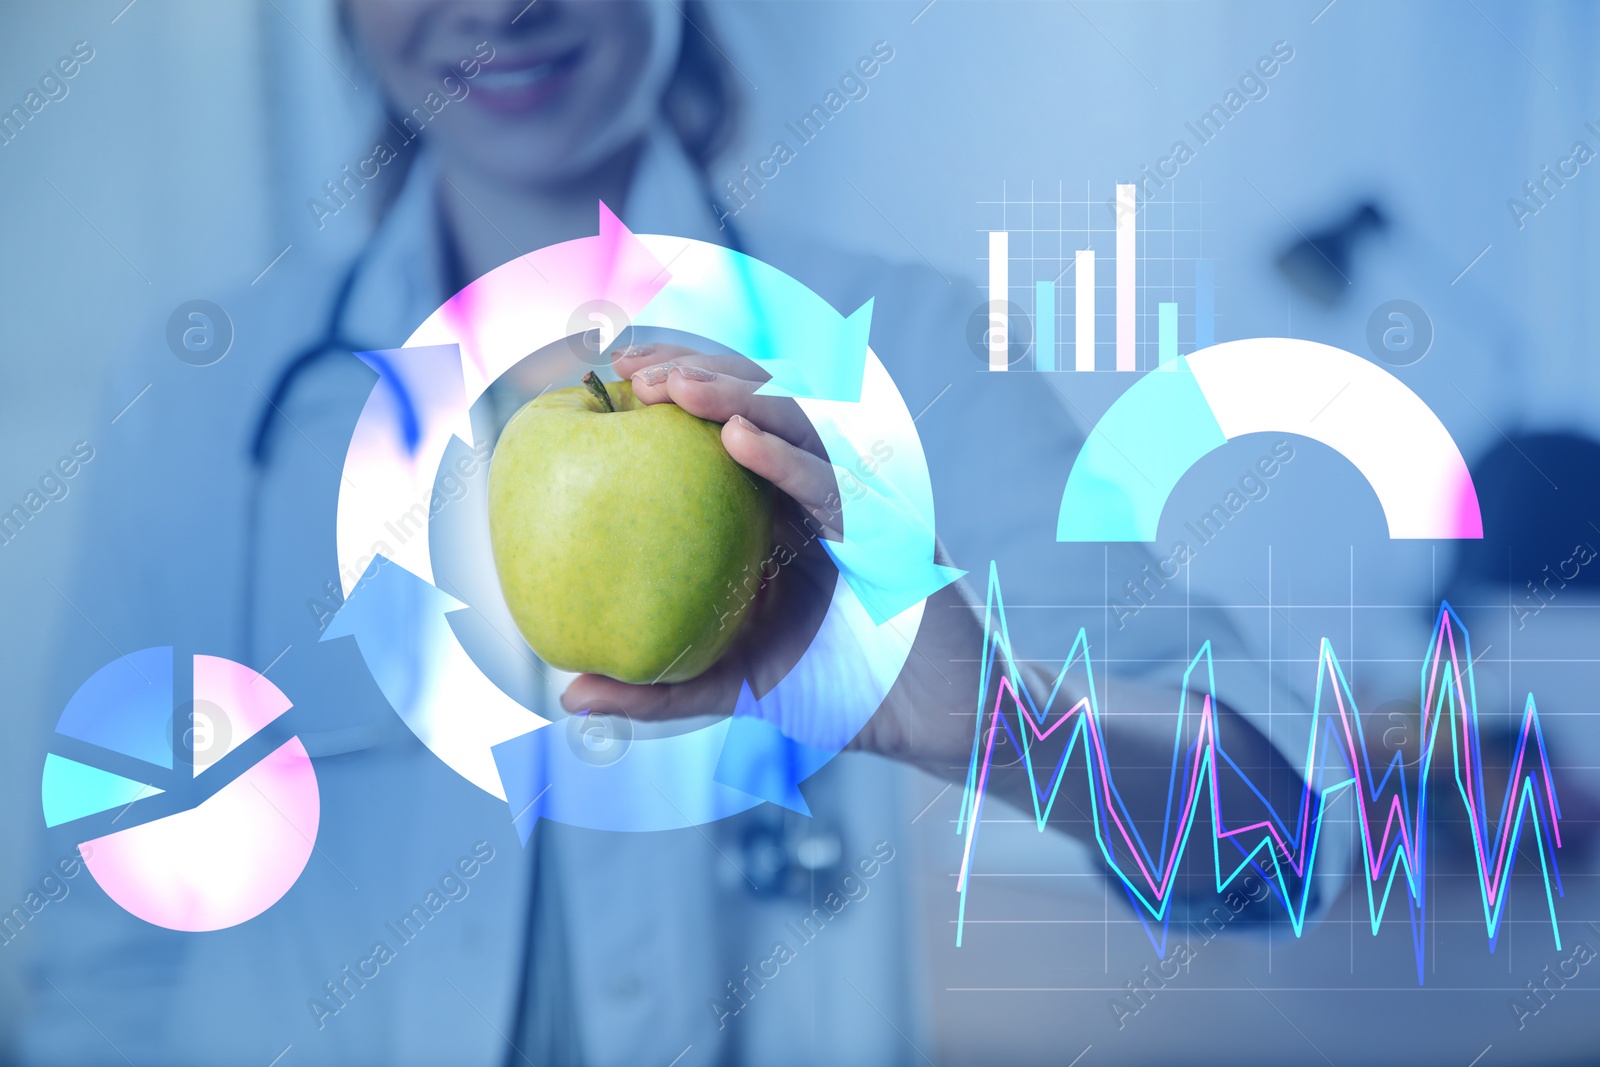 Image of Nutritionist with fresh apple in office and illustration of charts. Healthy eating